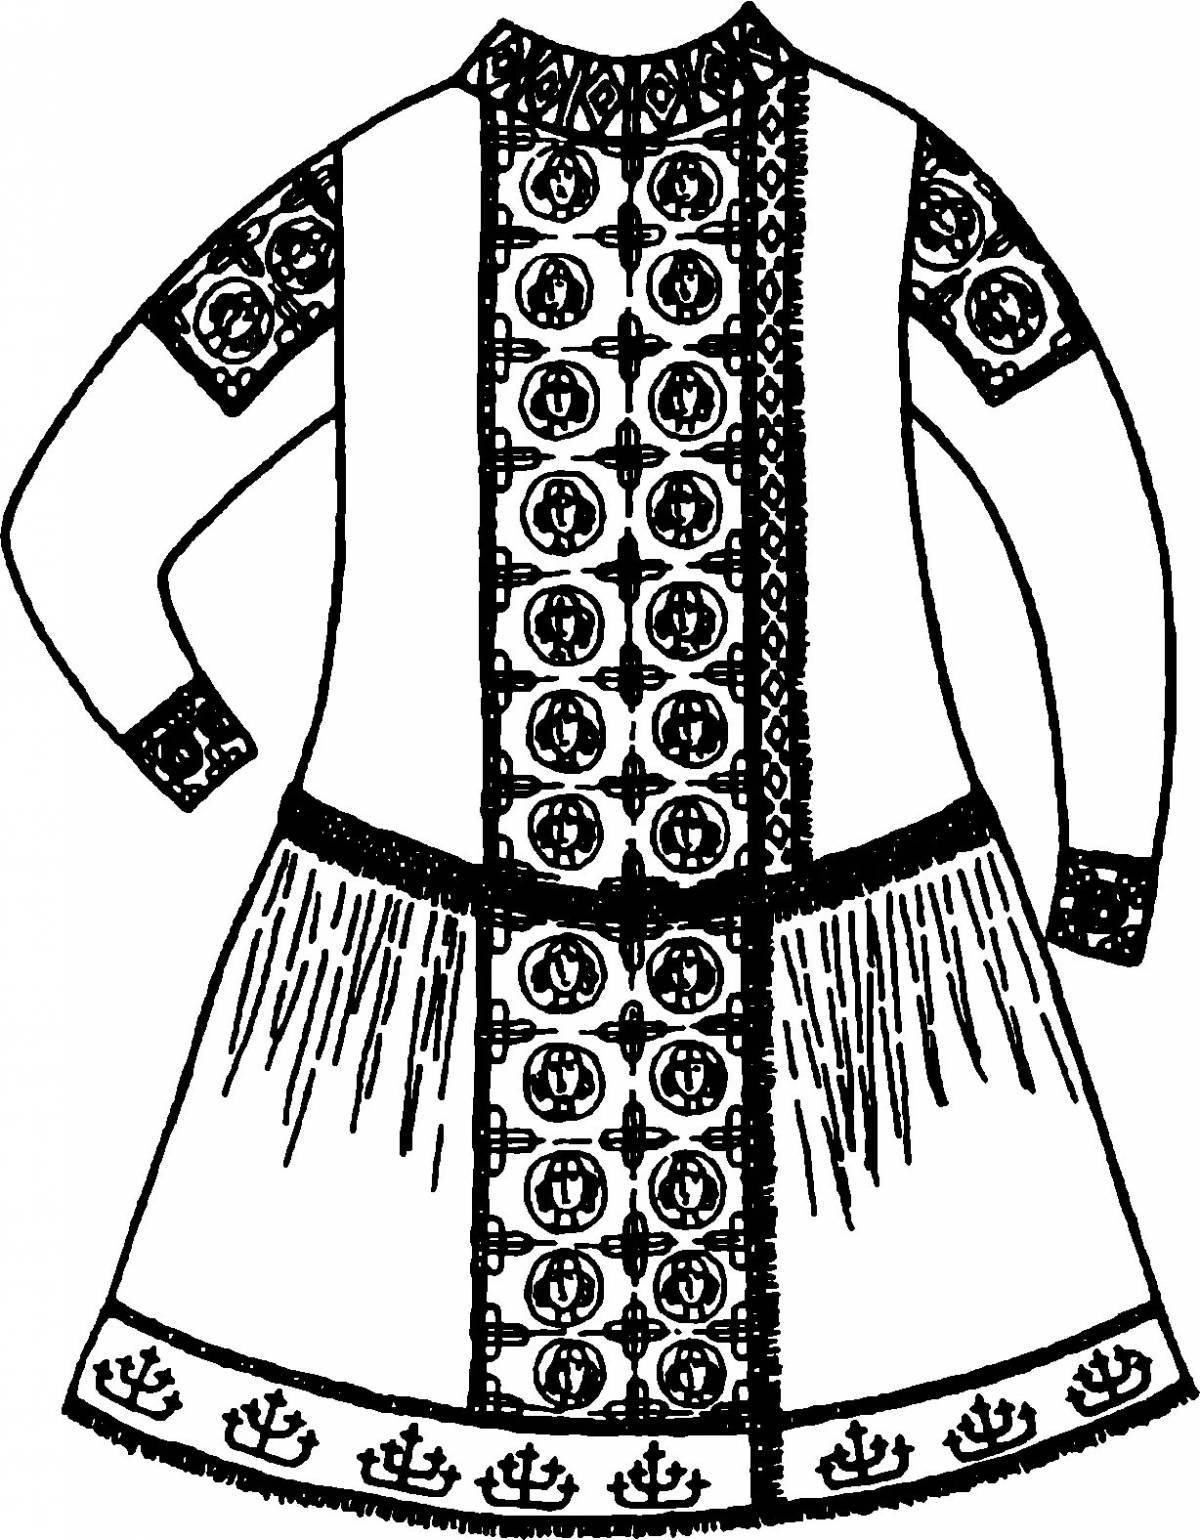 Smart Adyghe national costume